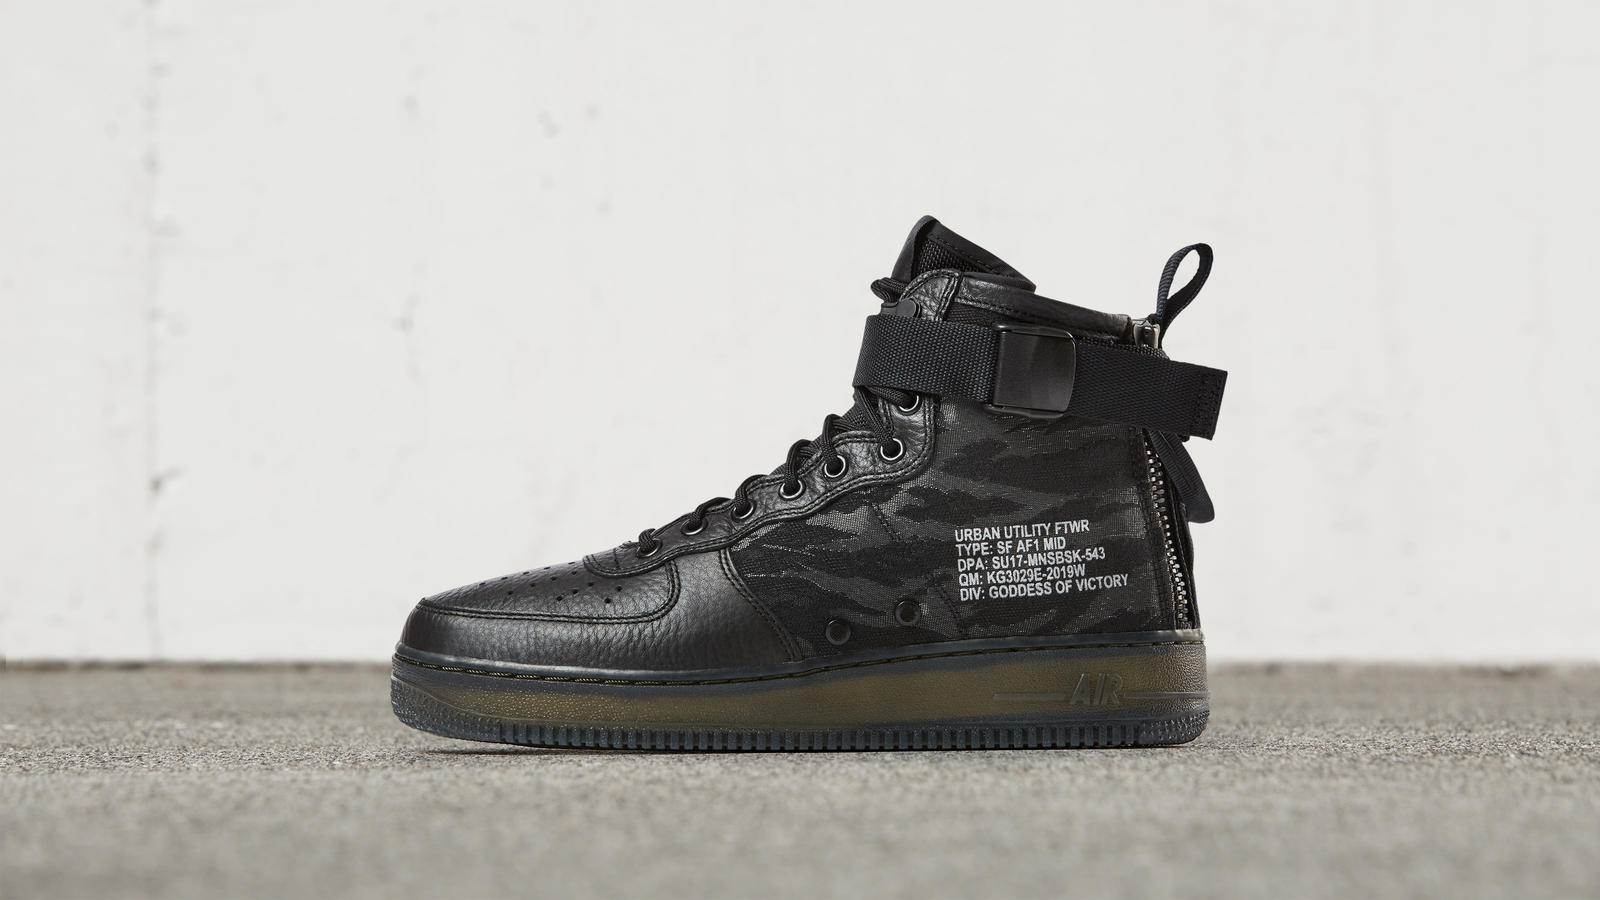 NIKE SPECIAL FIELD AIR FORCE 1 MID 